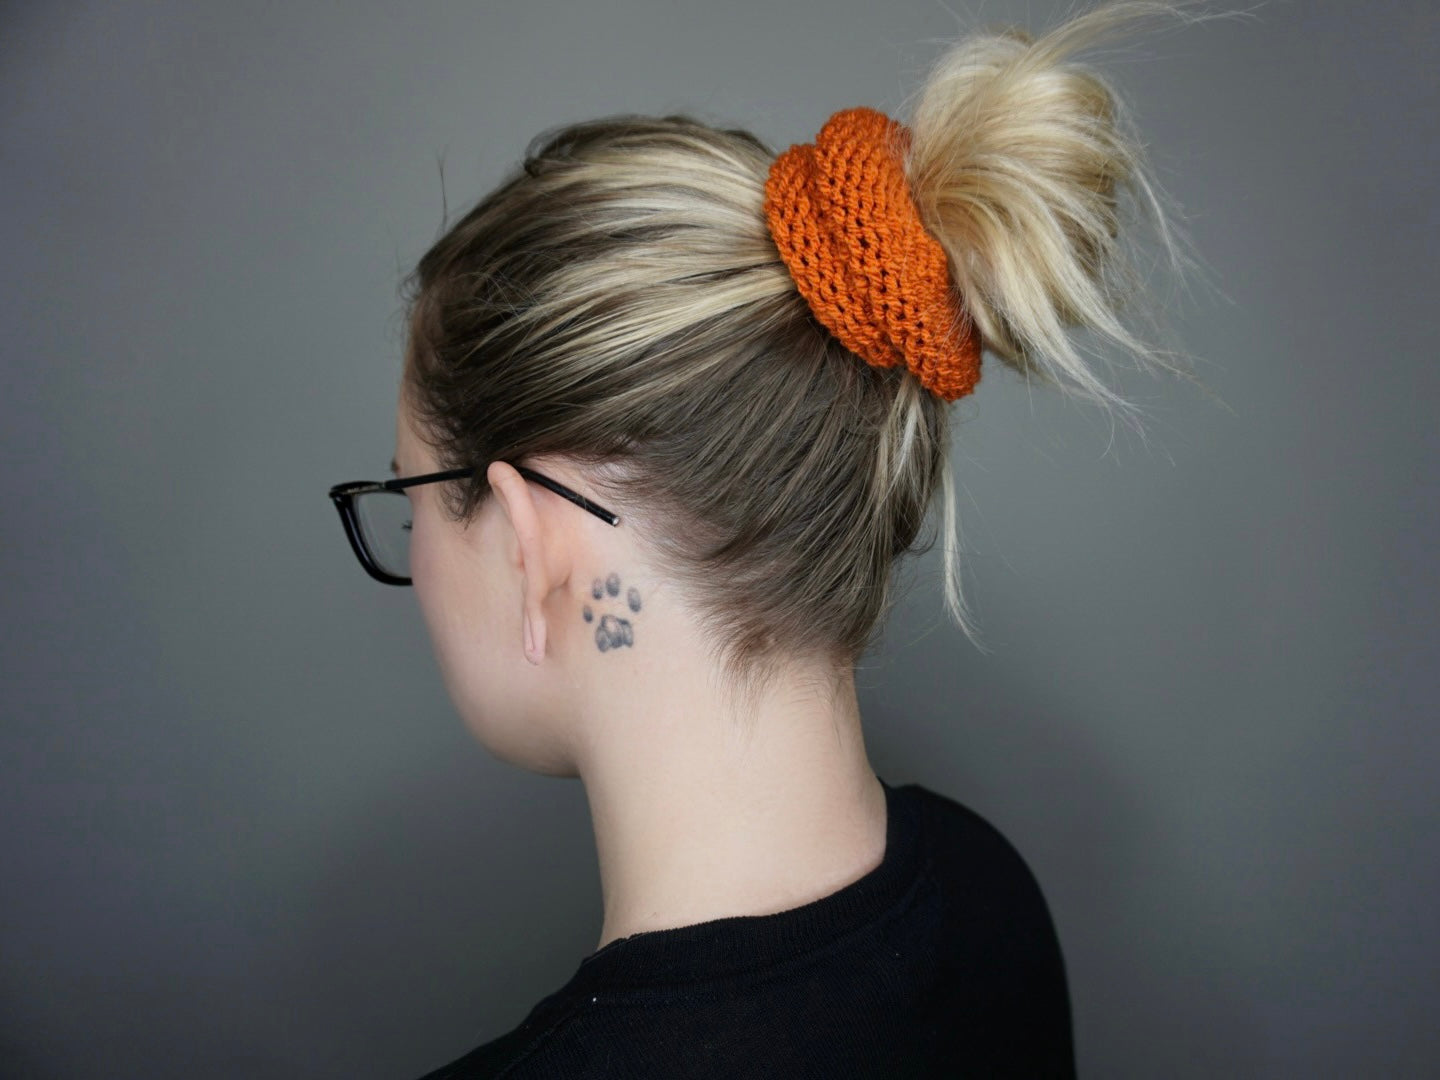 Halloween Knit Scrunchie 3 pack in (S)Lime Green, Moody Purple, and Burnt Orange